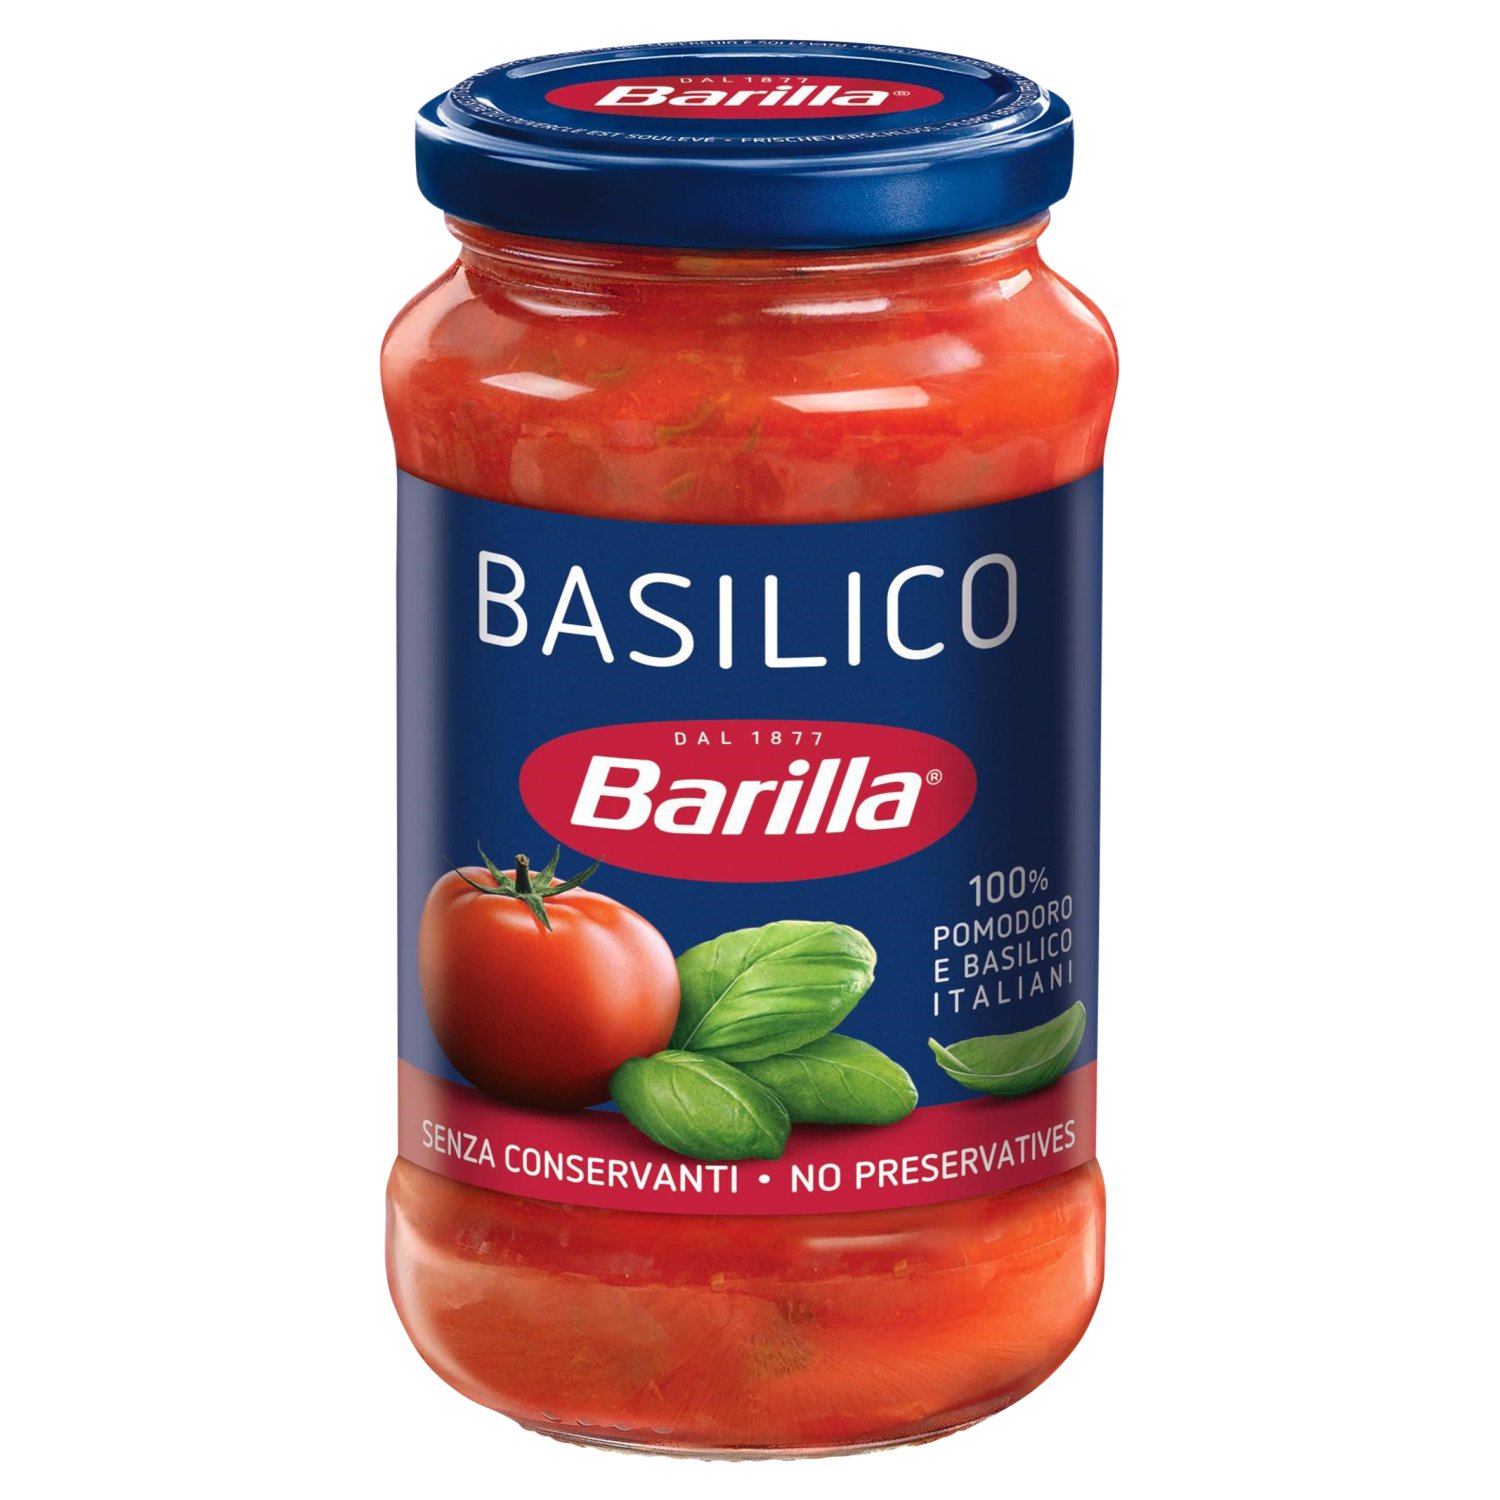 Barilla Basilico is a rich and tasty Tomato and Basil Pasta sauce, made with care, using selected quality ingredients. 100% sunripened Italian tomatoes meet aromatic Italian basil to bring you a delicious pasta sauce. Perfect with pasta, bring to your table the pleasure of classic Italian cuisine. Pairing well with both sophisticated and simple pasta cuts, try this fragrant, everyday pasta sauce with any pasta cut of your choice, including Spaghetti, Penne, and Fusilli, for a quick, delicious meal the whole family will love. Crafted using quality ingredients, Barilla Basilico Tomato and Basil is the perfect sauce to bring you and your loved ones together. Suitable for vegetarians and vegans, it has no preservatives and is gluten-free. At Barilla, we are passionate about pasta and have been sharing our passion with the world since 1877. We believe that cooking for someone can be a true sign of love, told in a few minutes by preparing a beautiful dish of pasta for the people you care about most. At Barilla, we strive to make pasta and sauce products that are good for you and good for the planet - 99.6% of our packaging is designed to be recycled. Barilla. A sign of love.